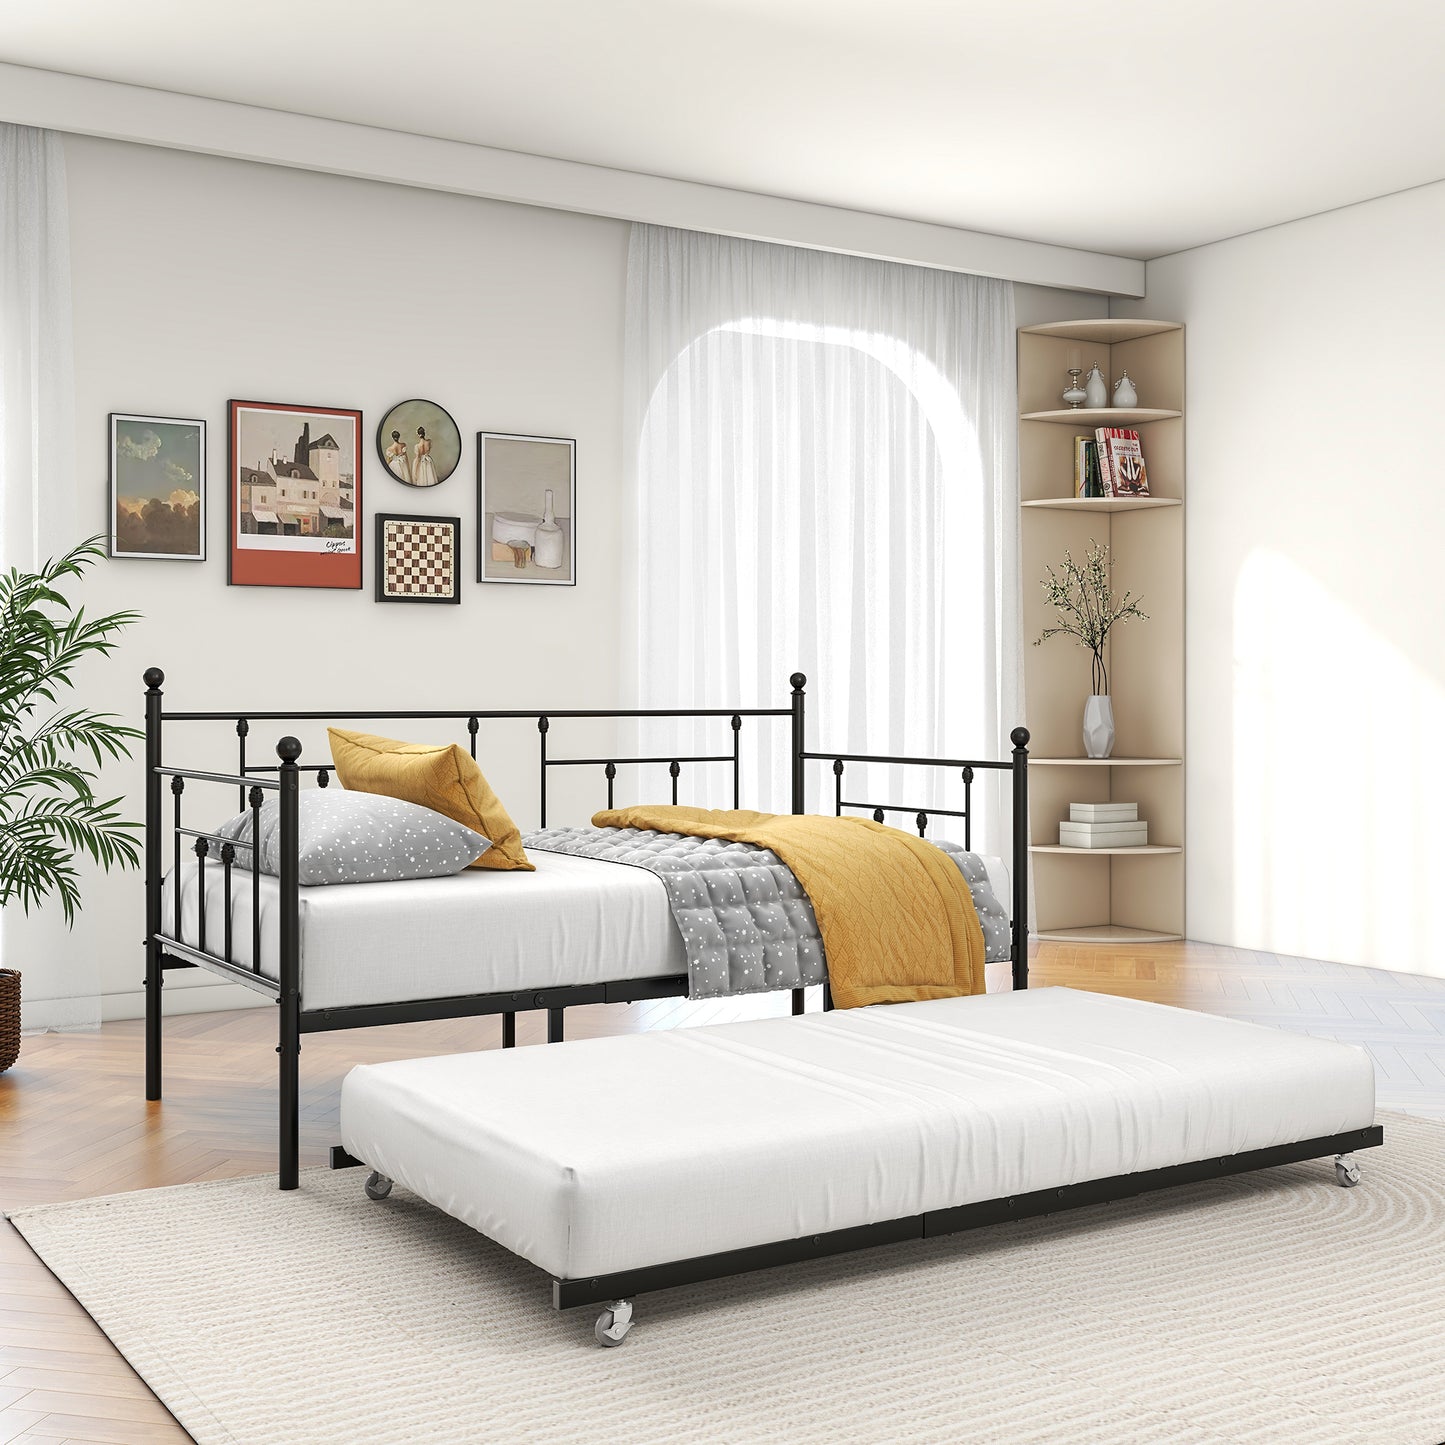 Twin-Sized Full Metal Pull-Out Daybed Bedframe with Trundle No Box Spring_3